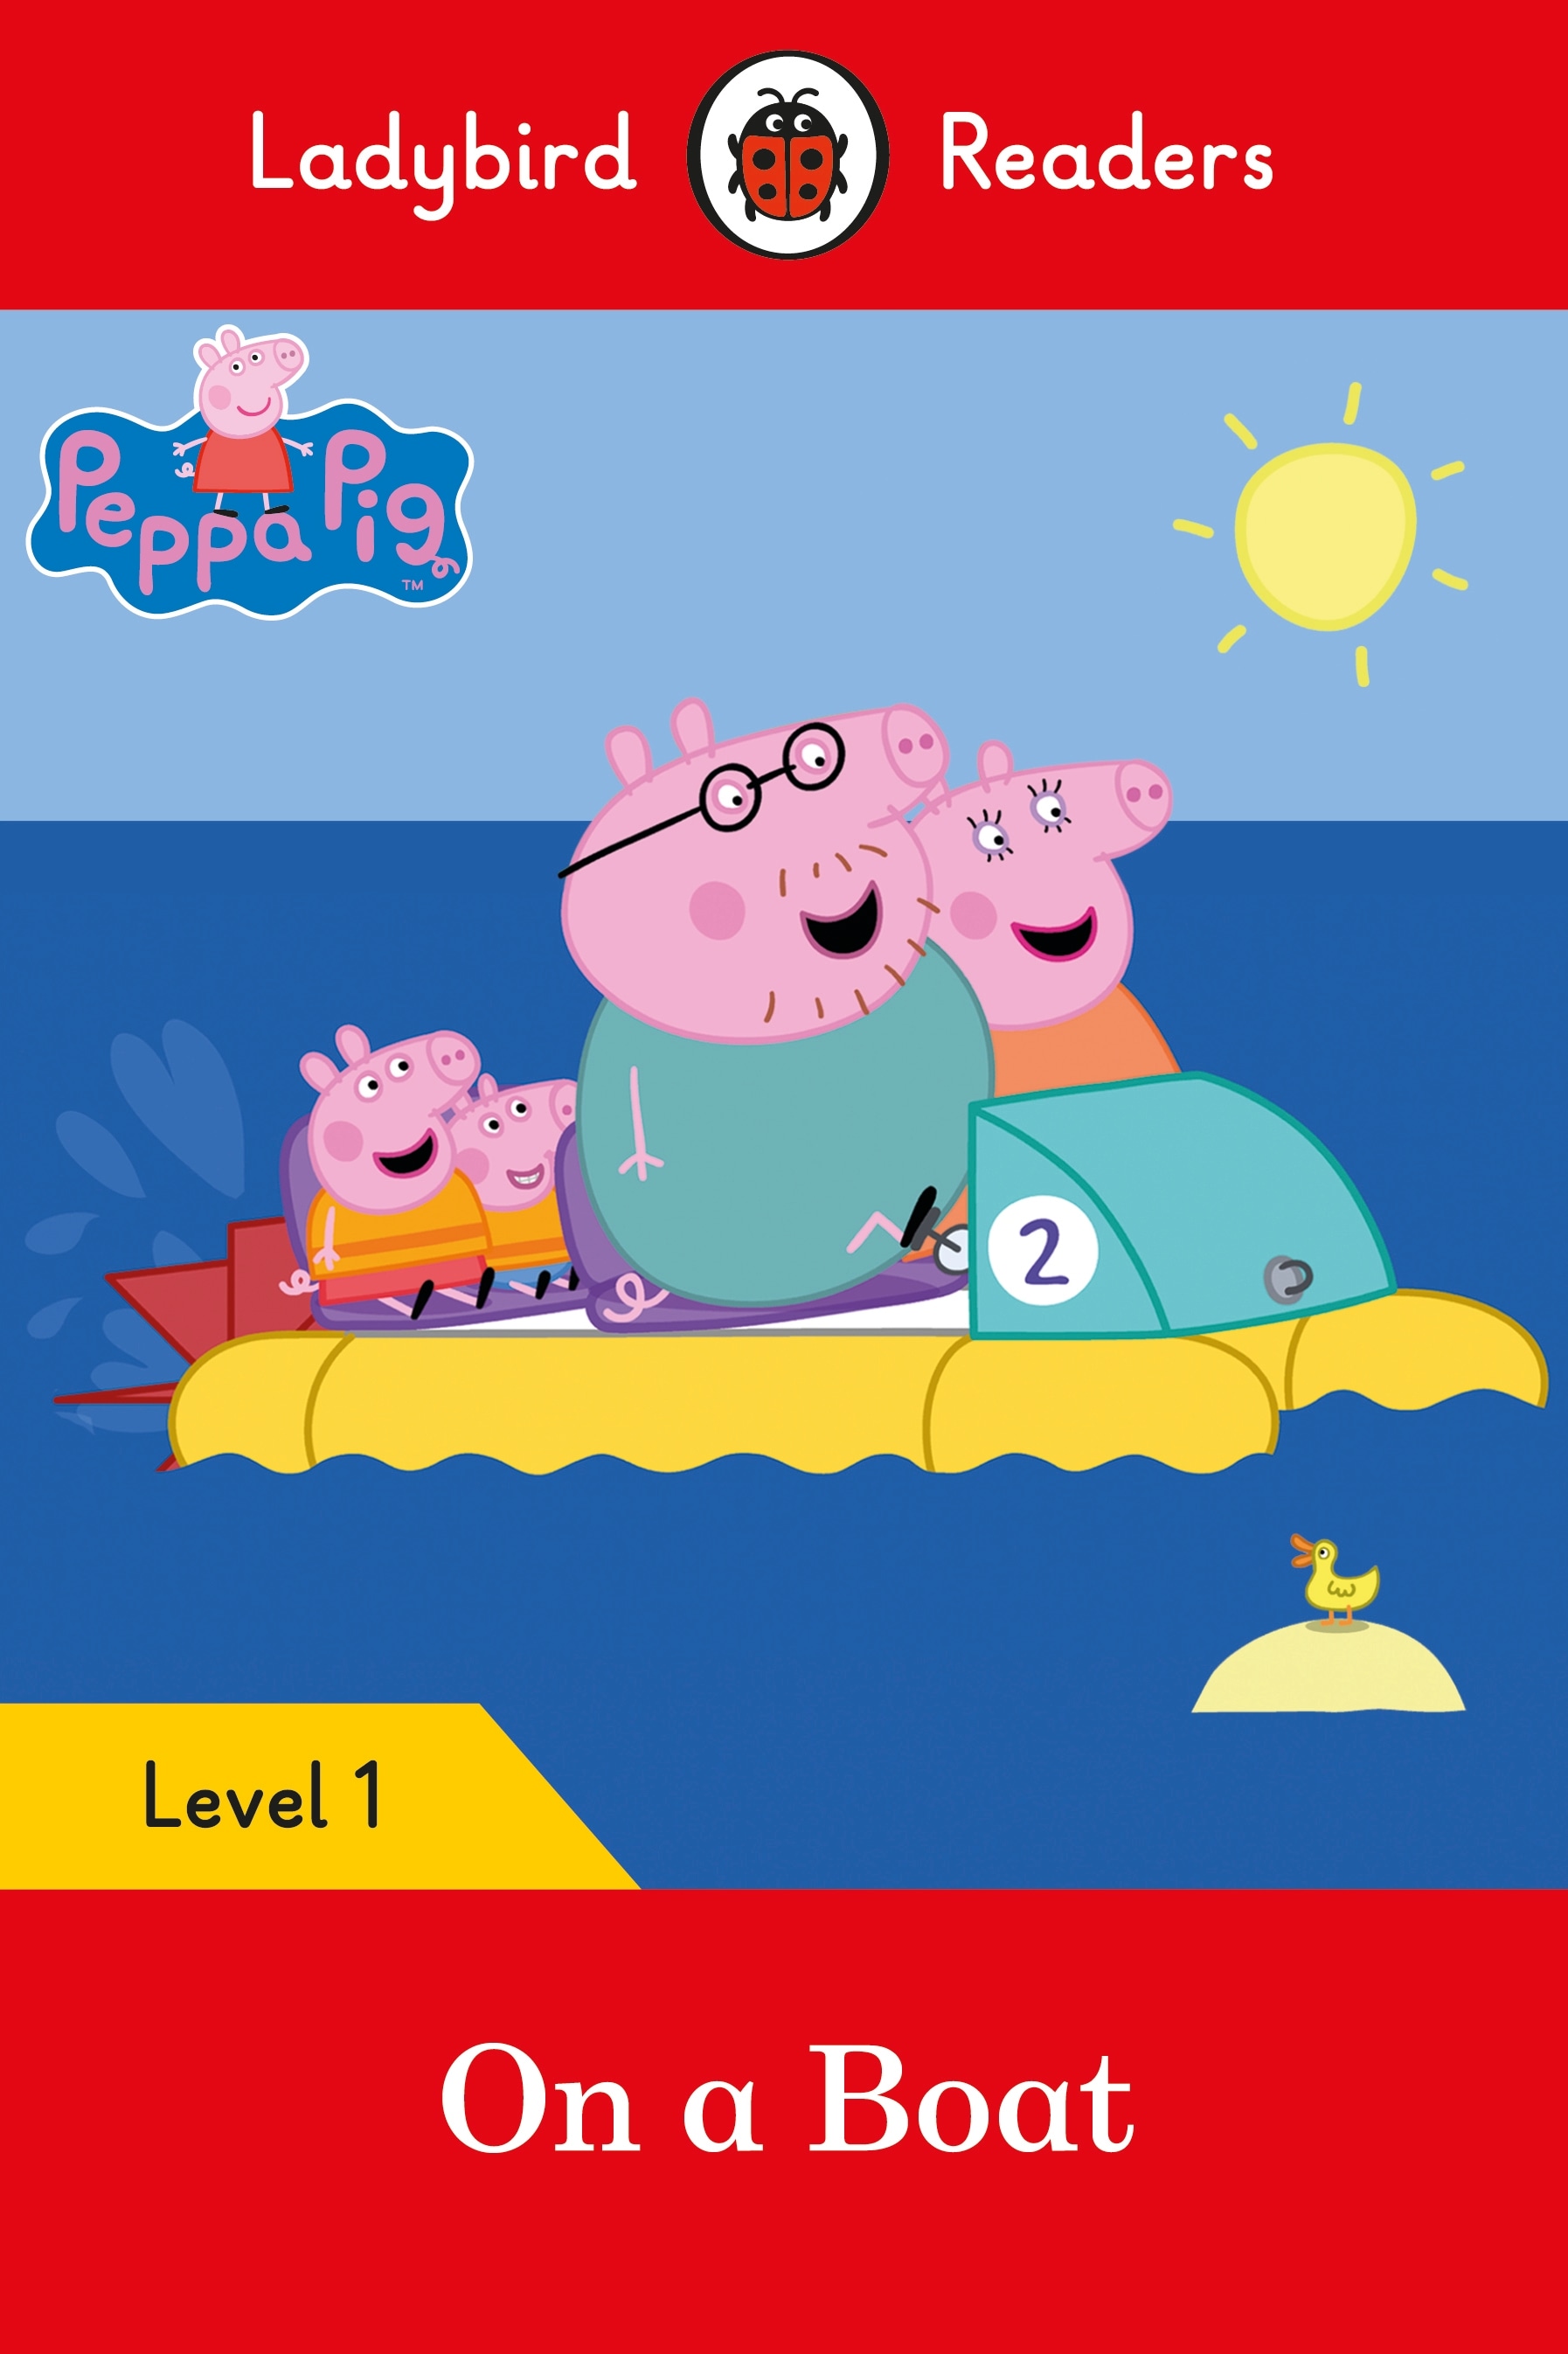 Peppa Pig: On a Boat - Ladybird Readers Level 1